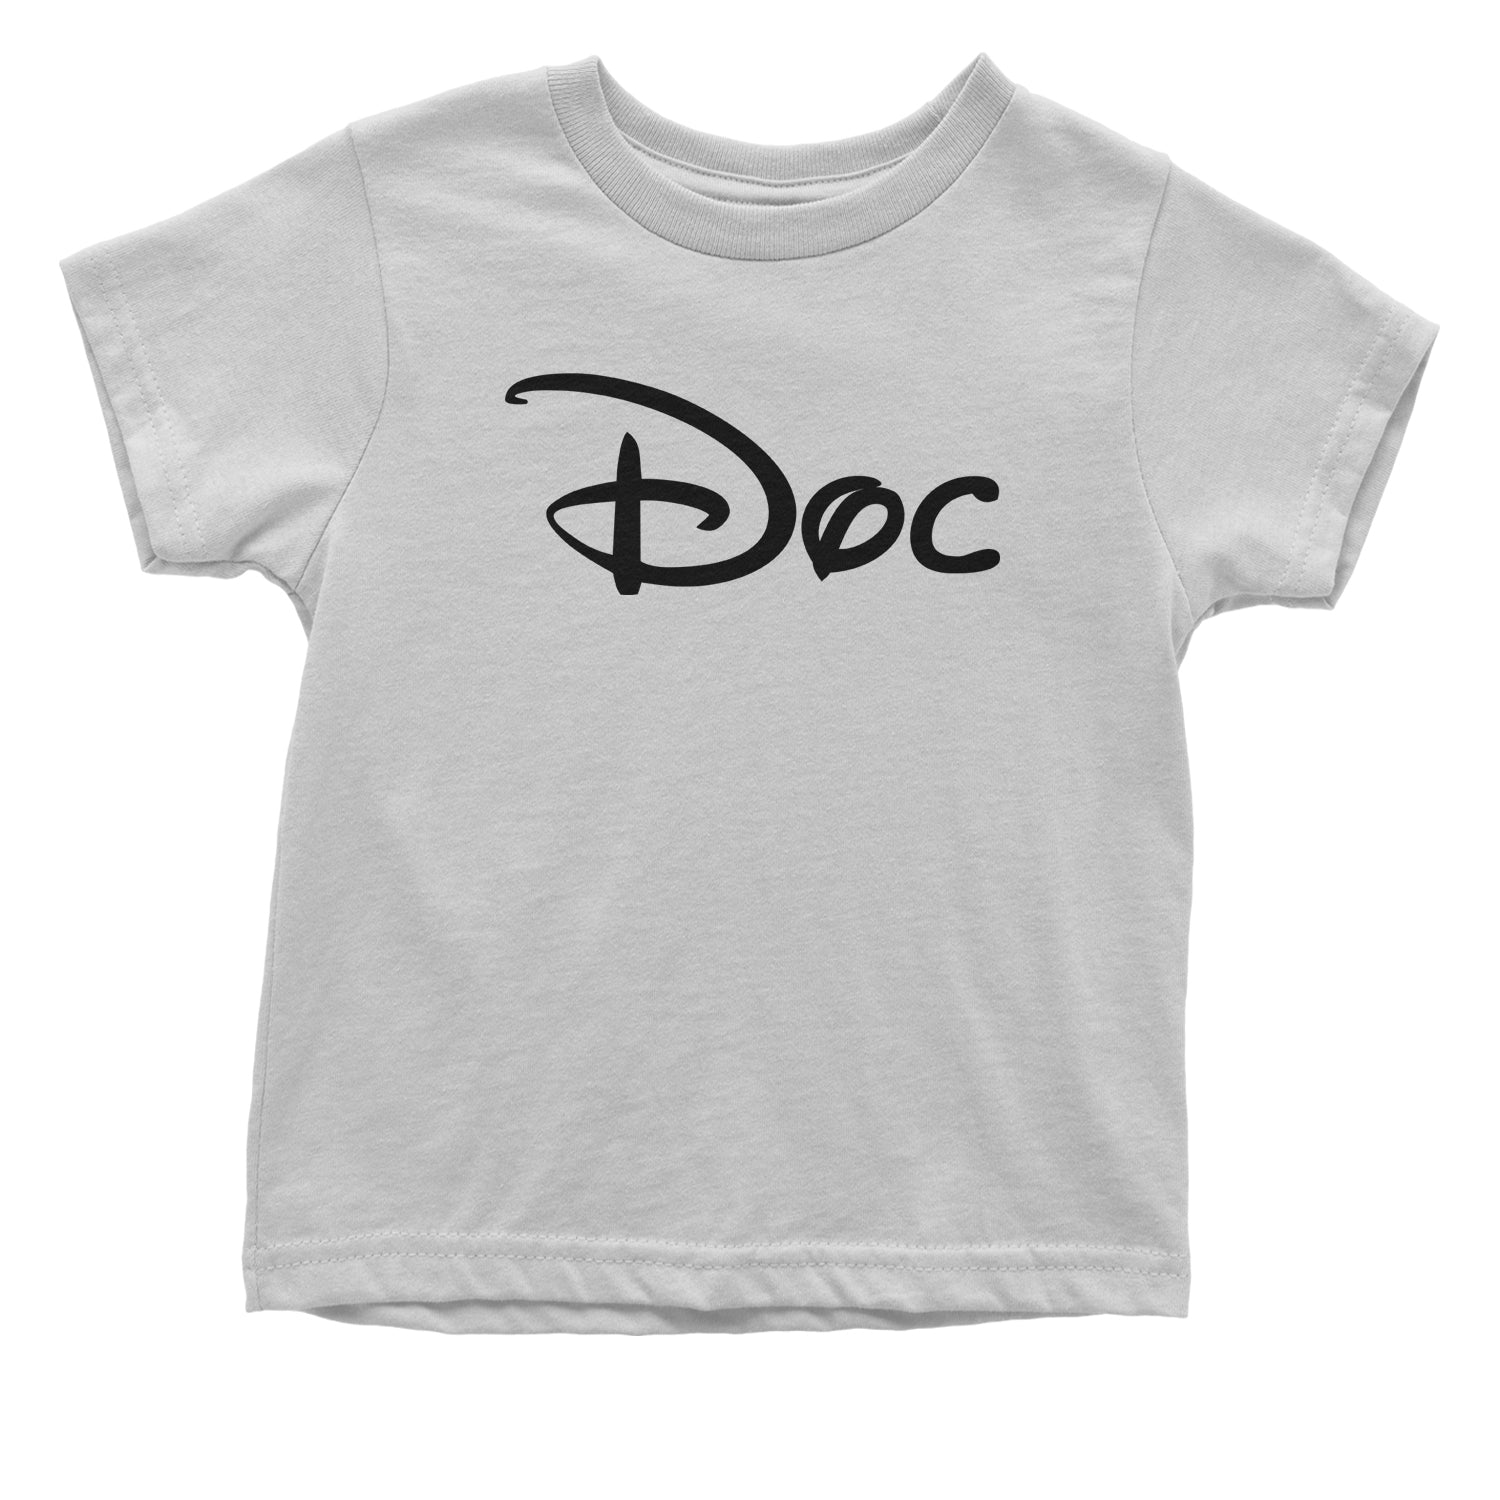 Doc - 7 Dwarfs Costume Toddler T-Shirt and, costume, dwarfs, group, halloween, matching, seven, snow, the, white by Expression Tees